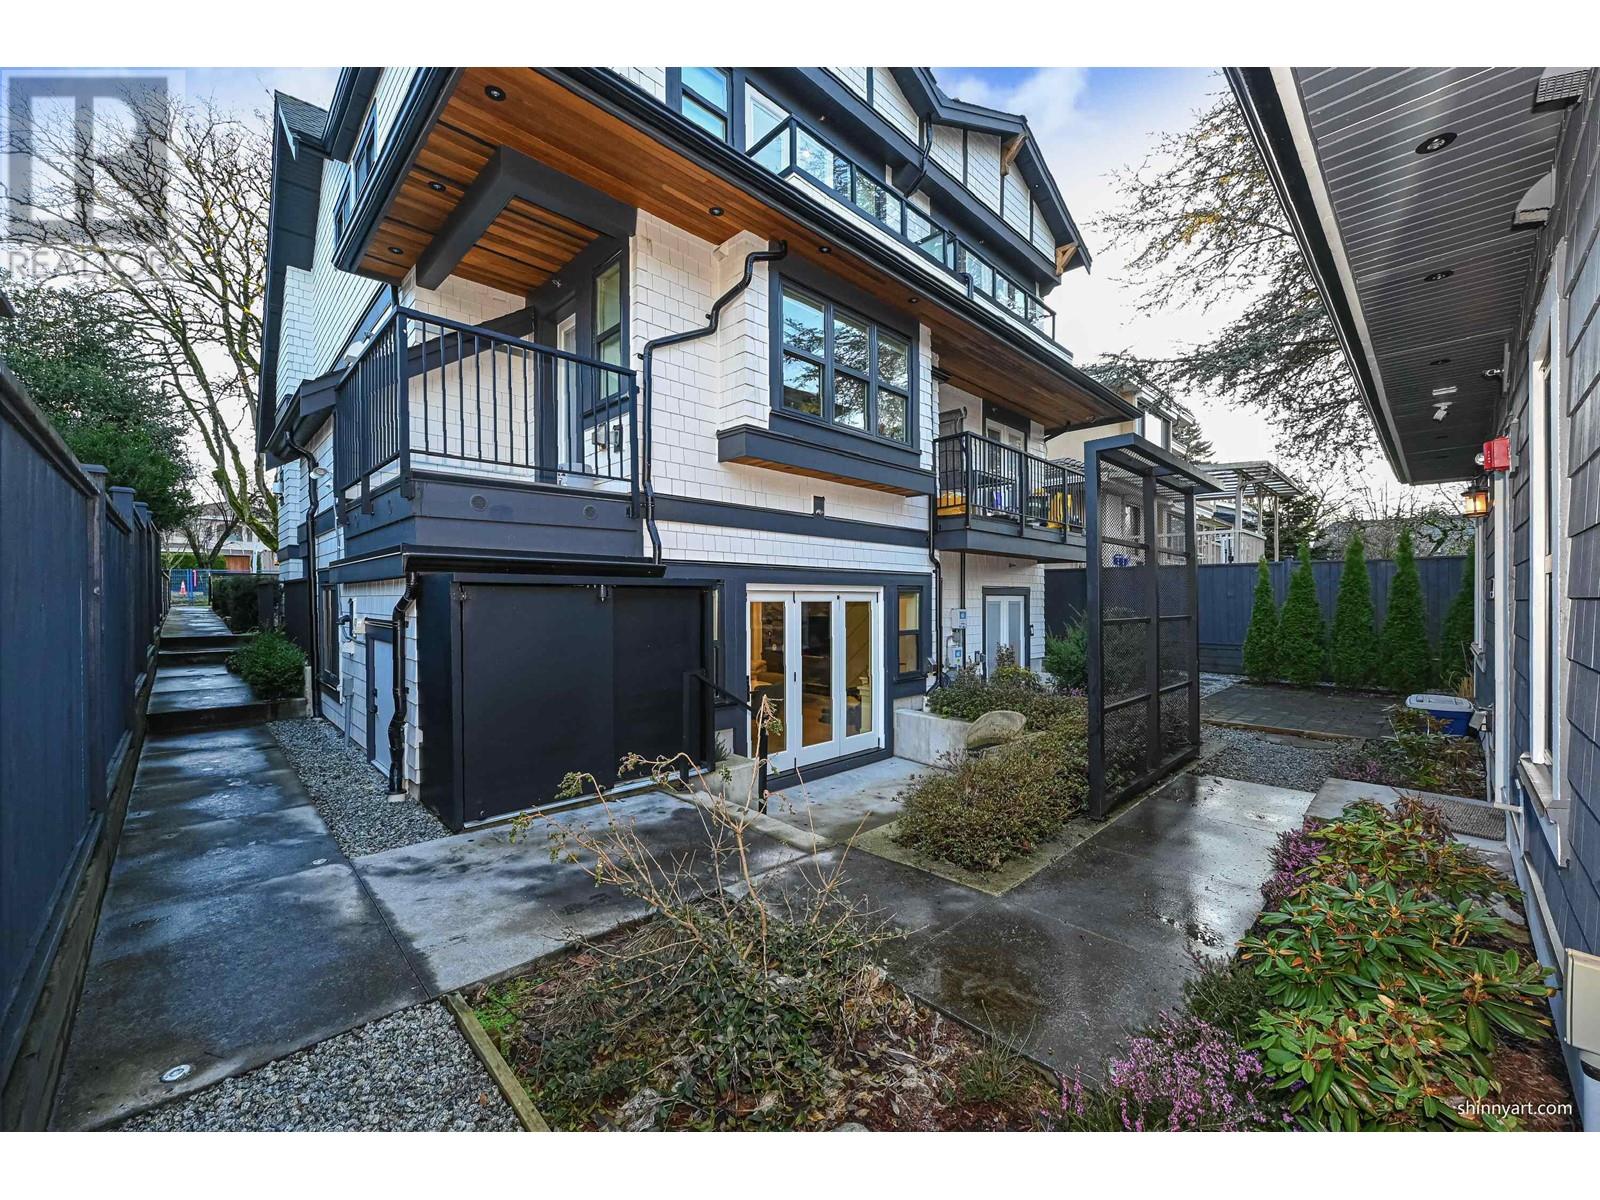 Listing Picture 27 of 29 : 3255 W KING EDWARD AVENUE, Vancouver / 溫哥華 - 魯藝地產 Yvonne Lu Group - MLS Medallion Club Member